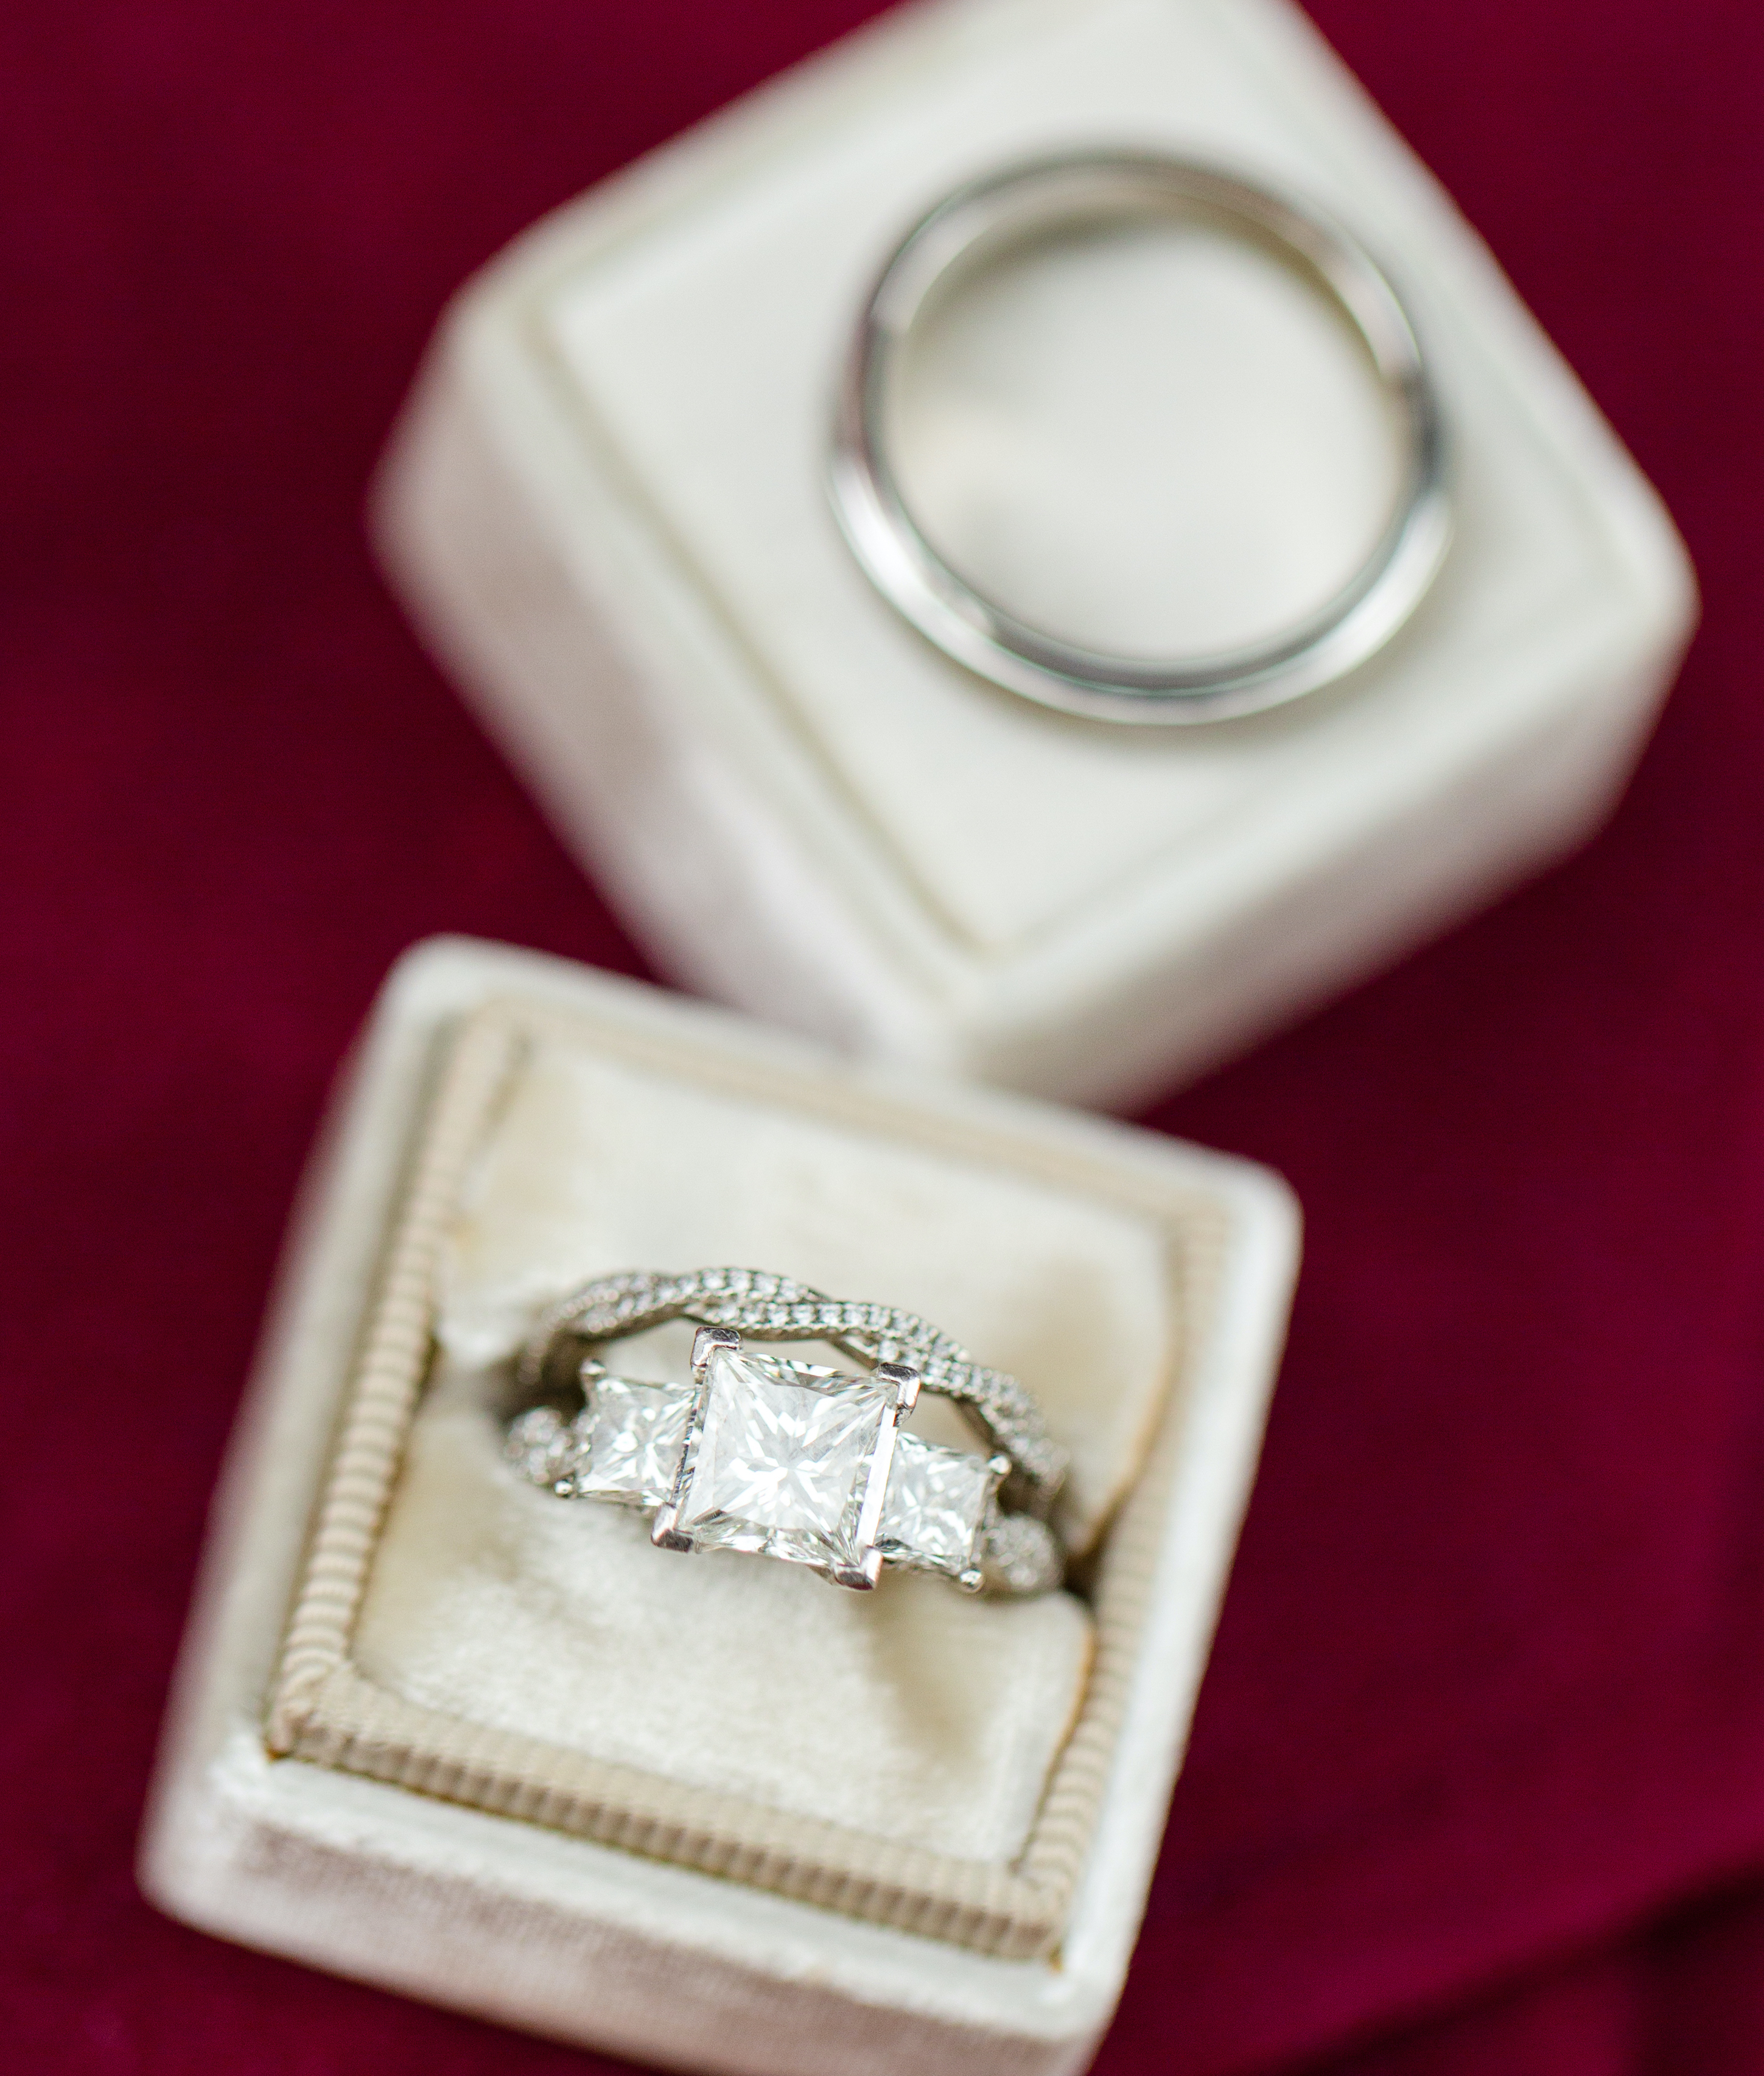 The bride's engagement ring is on a burgundy background and has square shaped diamonds.